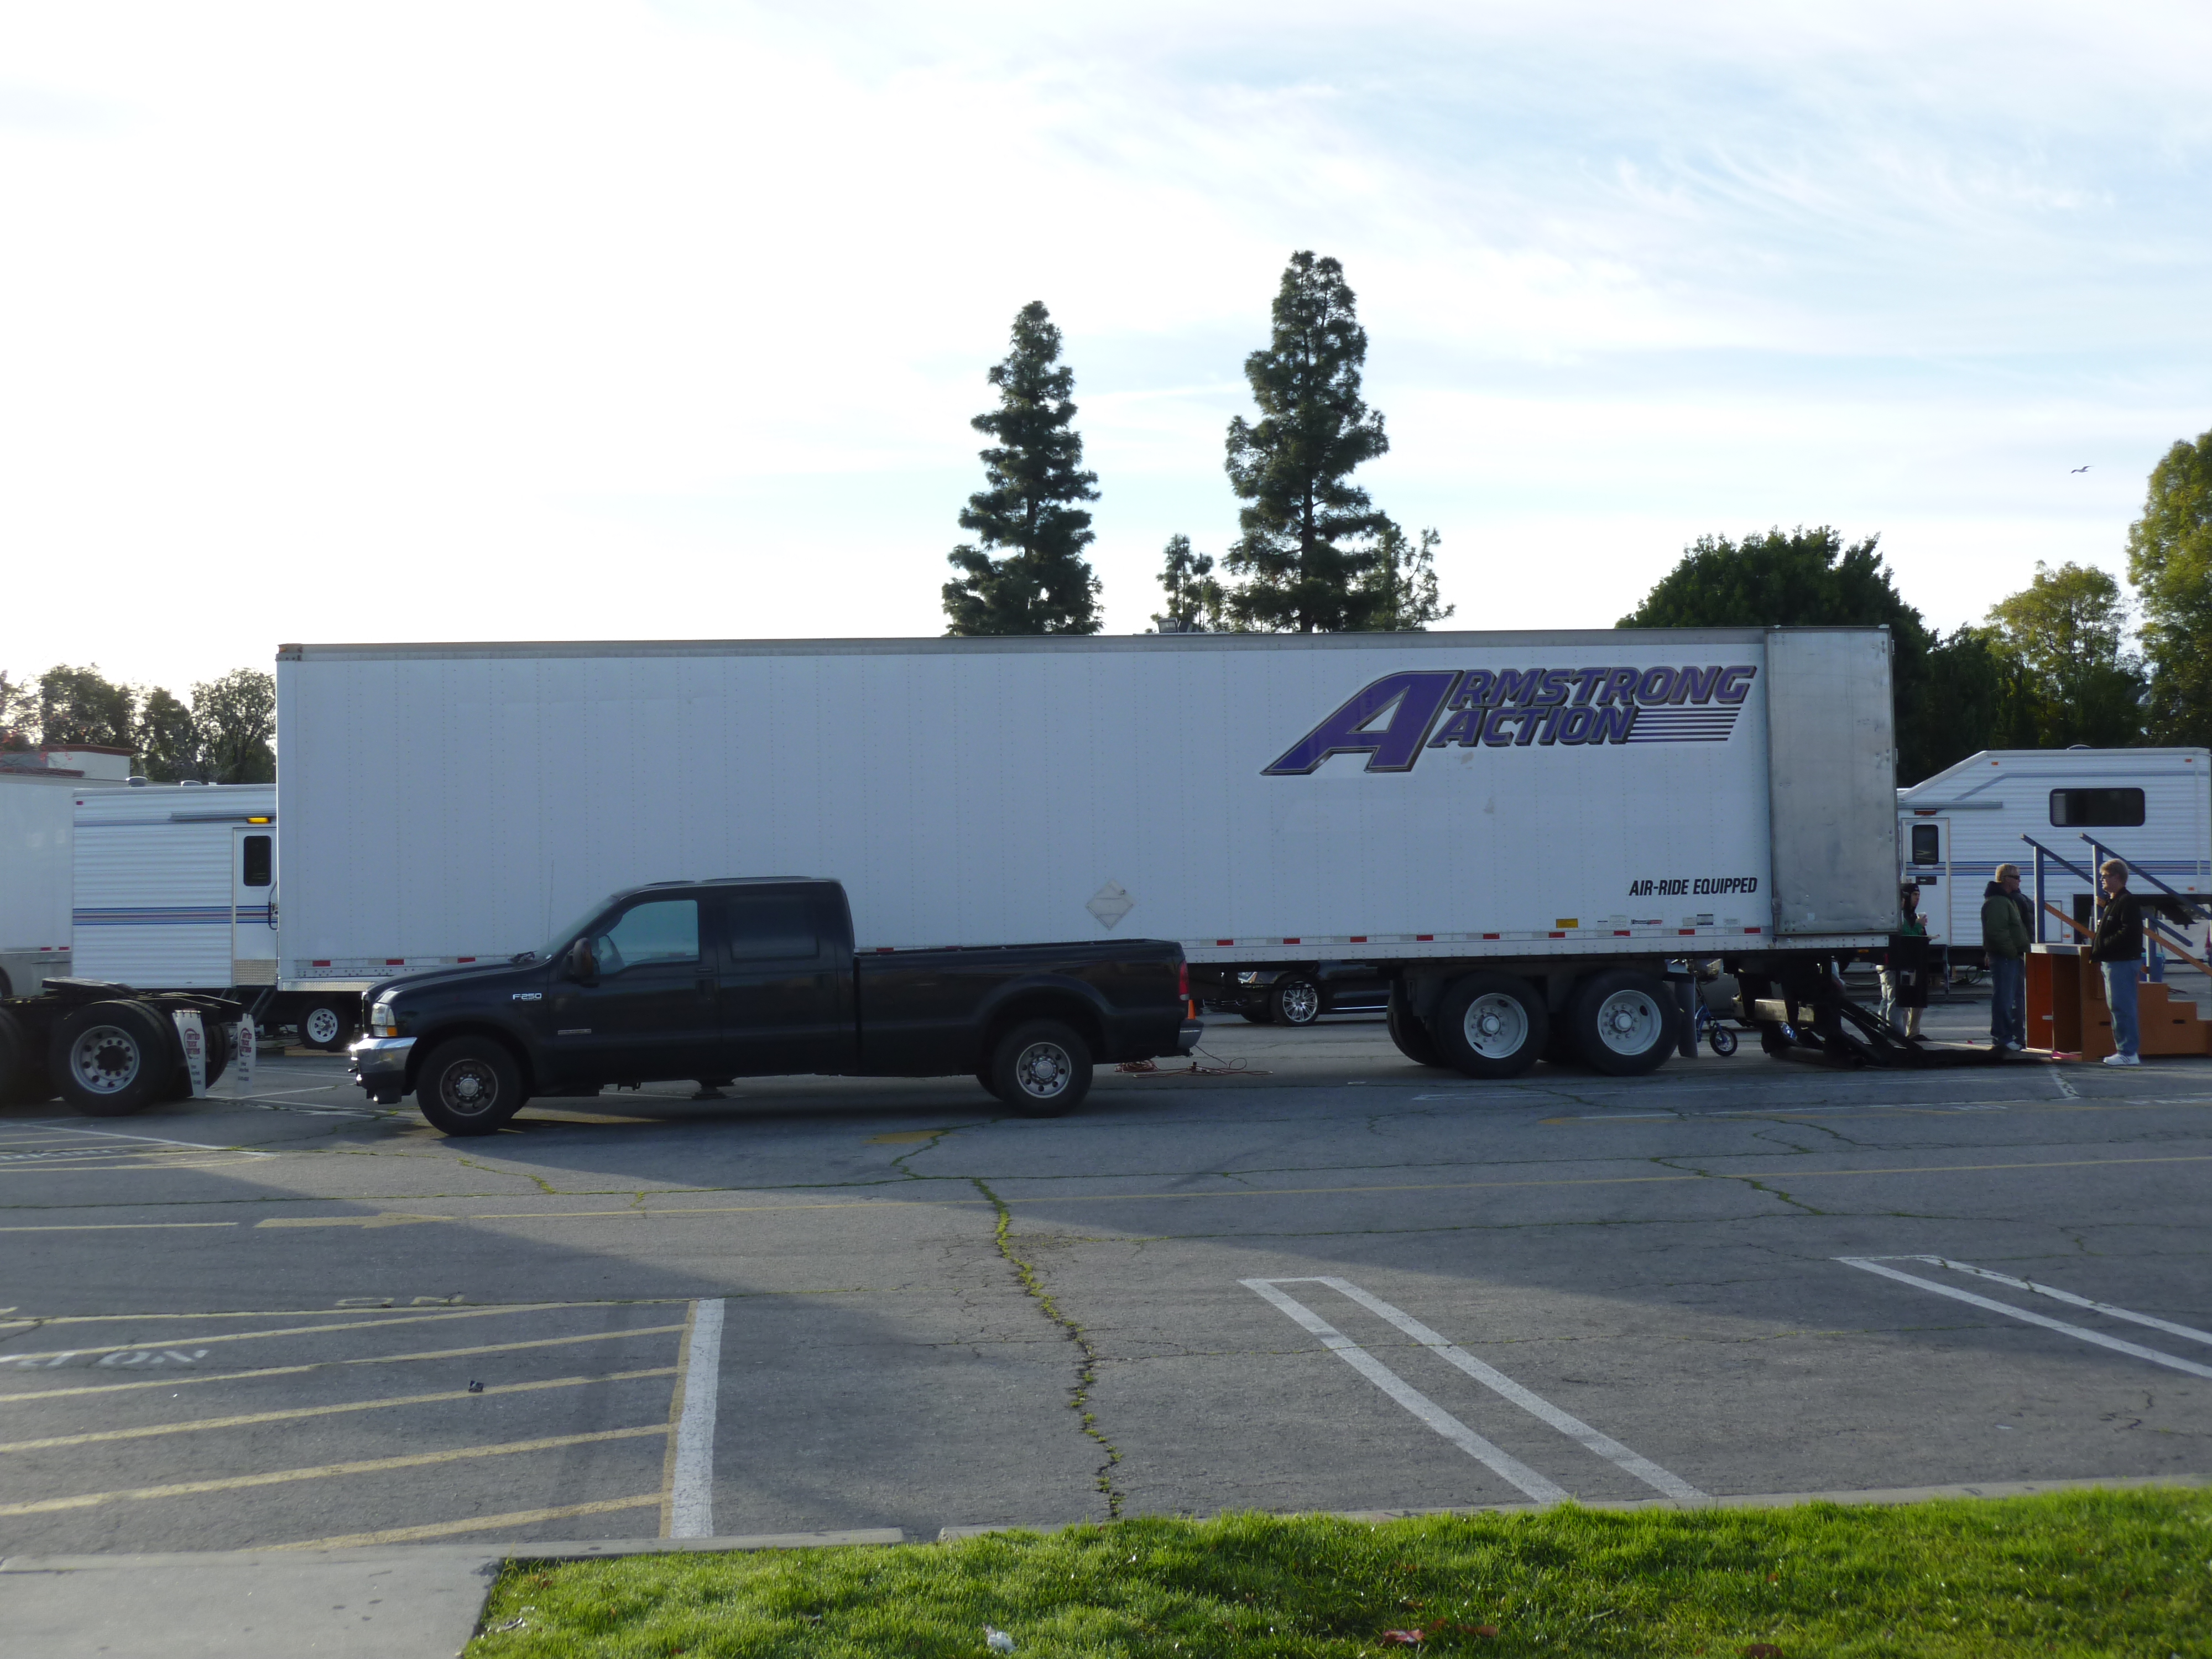 Armstrong Action 48 Foot Trailer #1 on location in Los Angeles on 